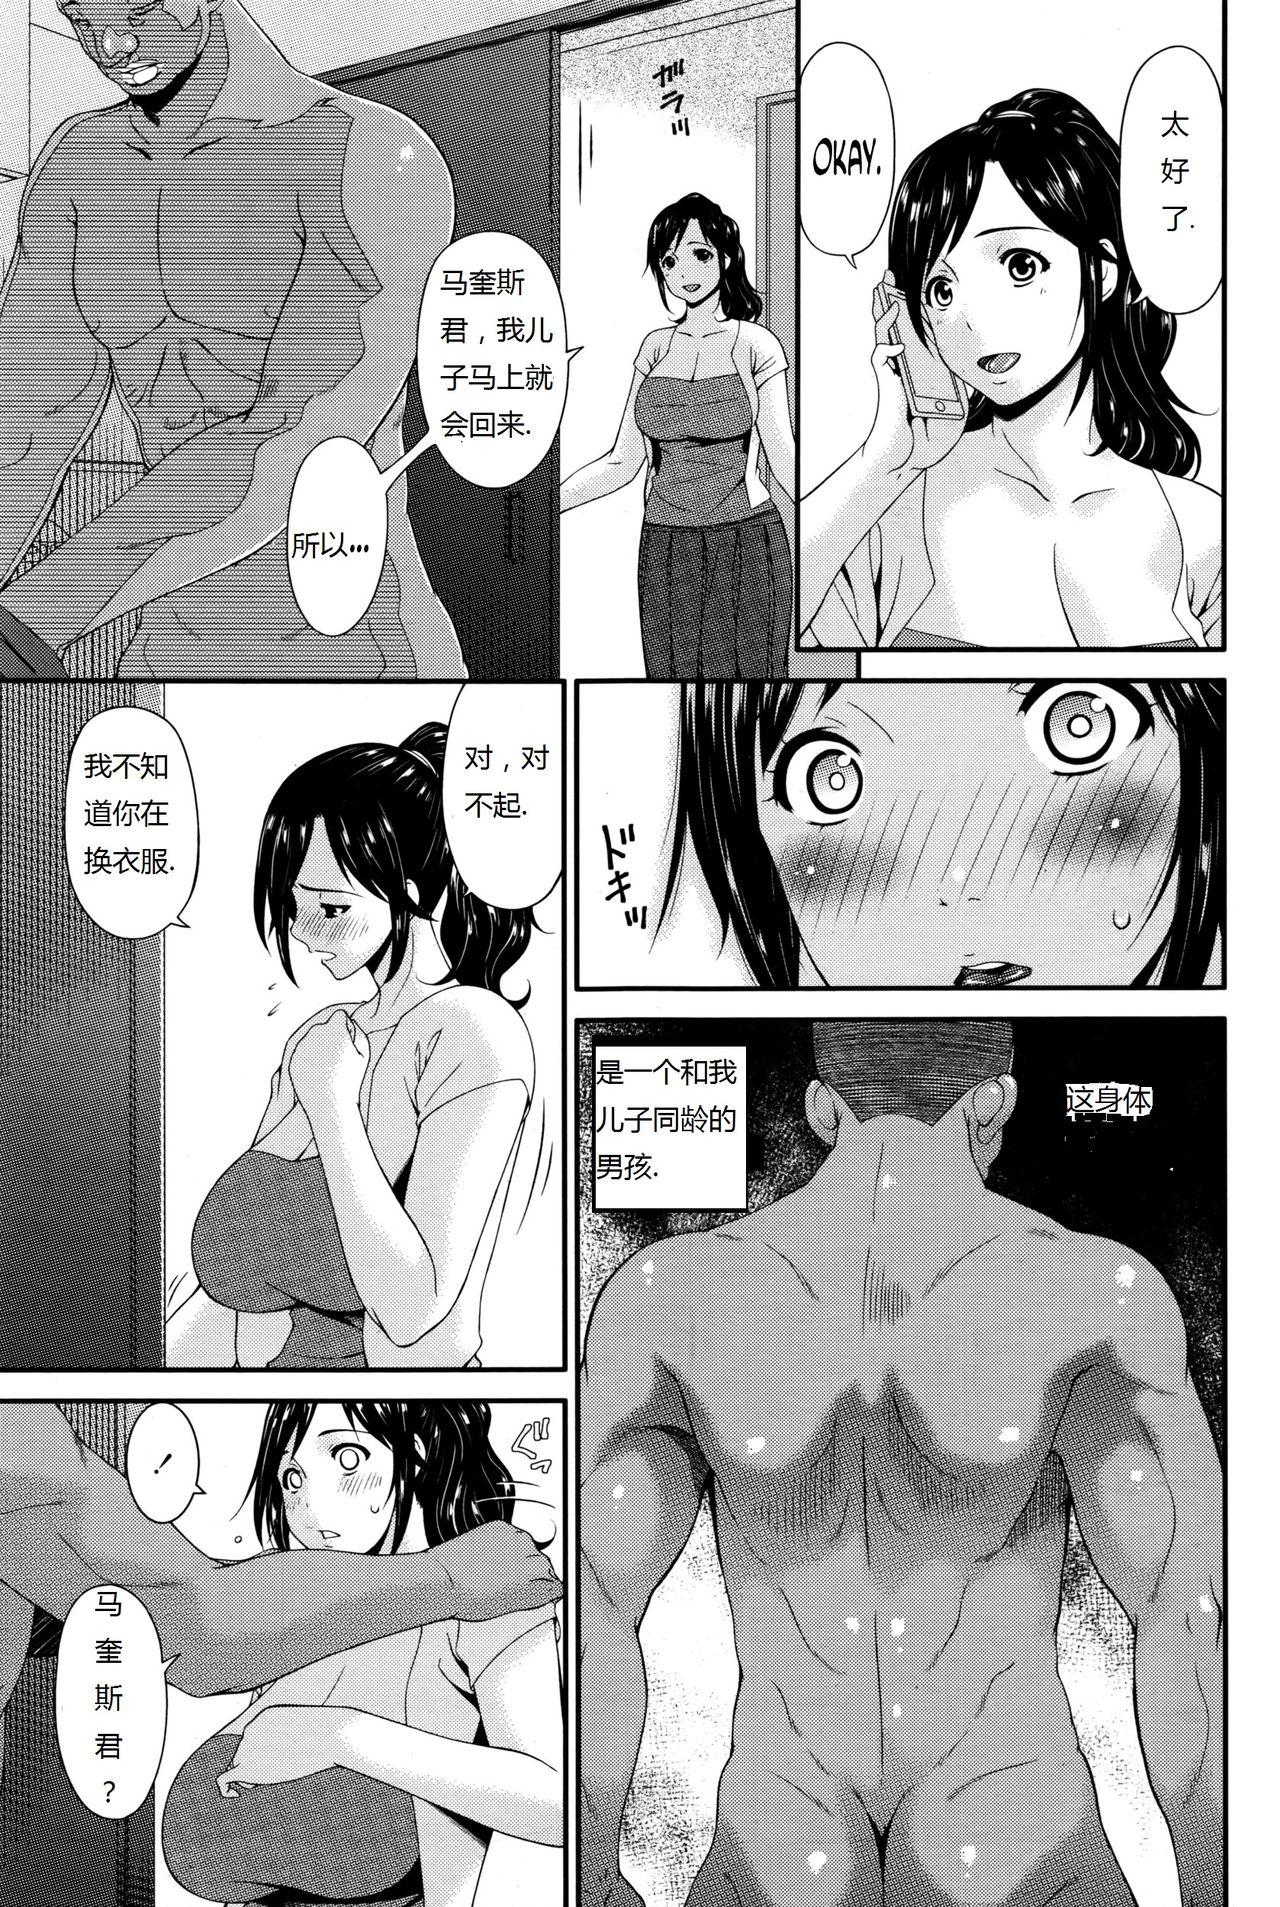 Spanking Youbo | Impregnated Mother Ch. 1-5 Com - Page 5